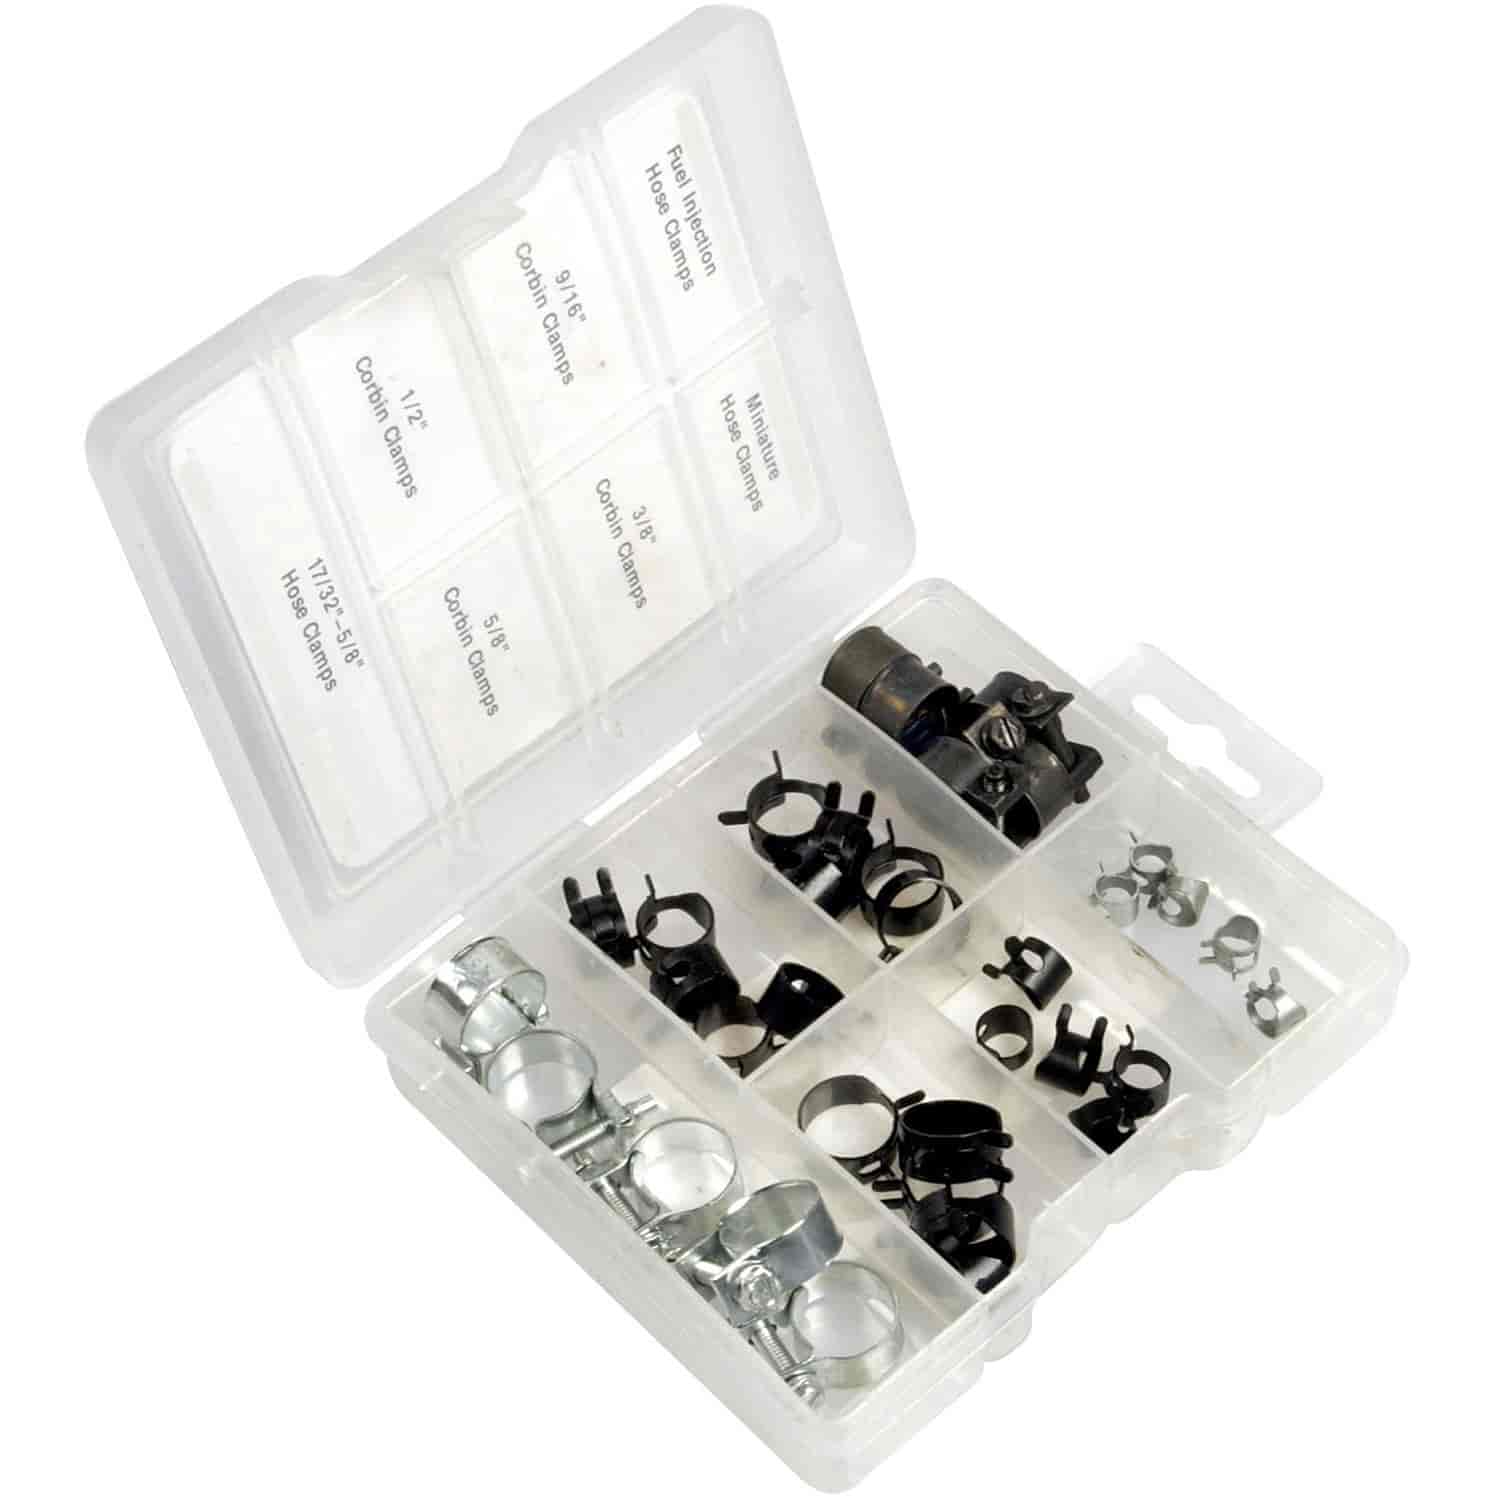 SMALL CLAMP ASSORTMENT